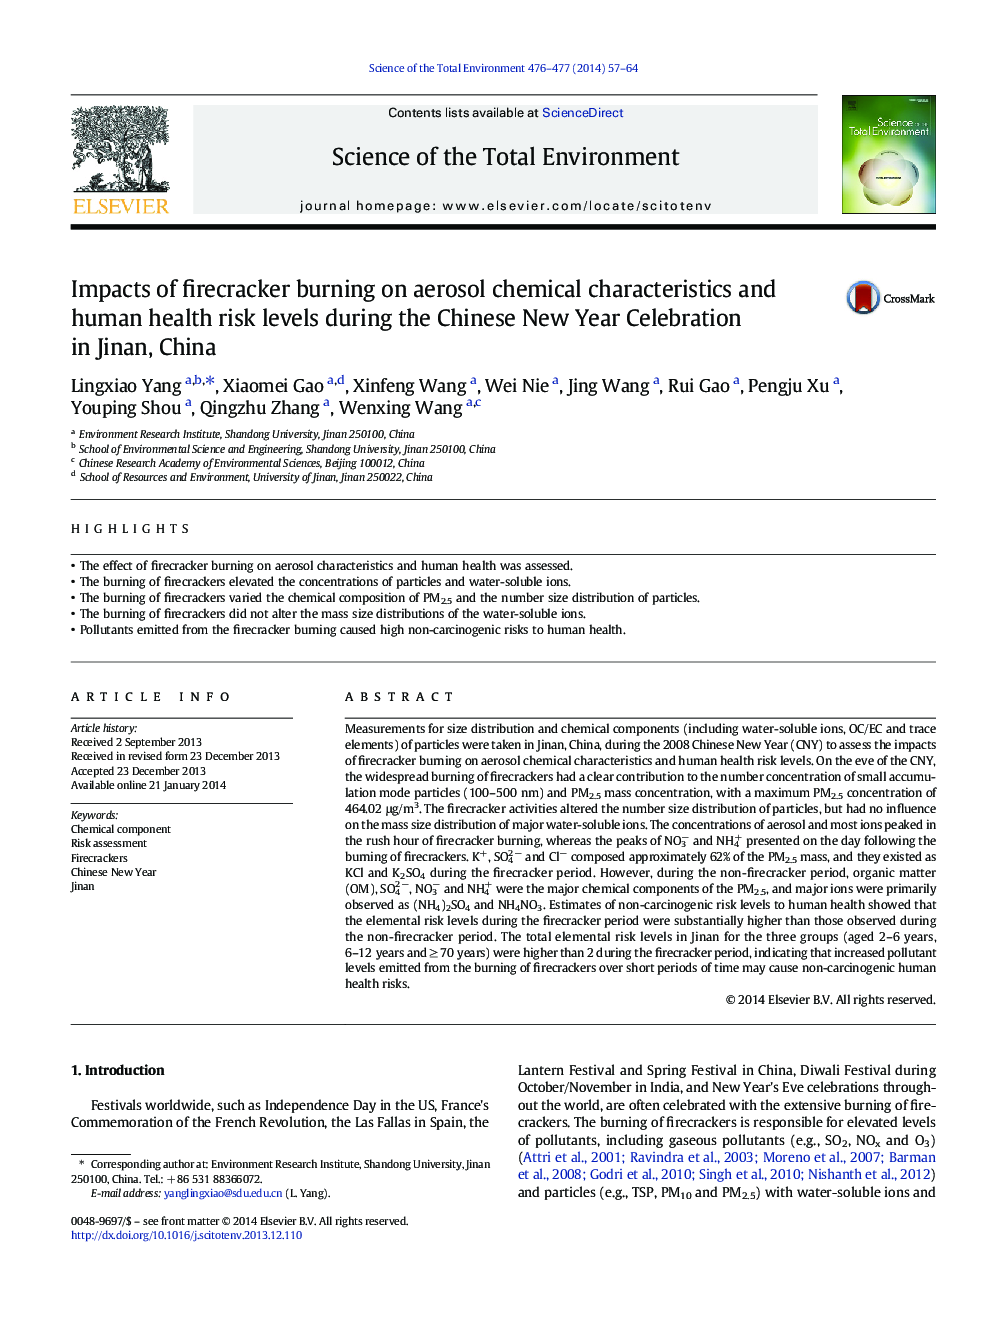 Impacts of firecracker burning on aerosol chemical characteristics and human health risk levels during the Chinese New Year Celebration in Jinan, China